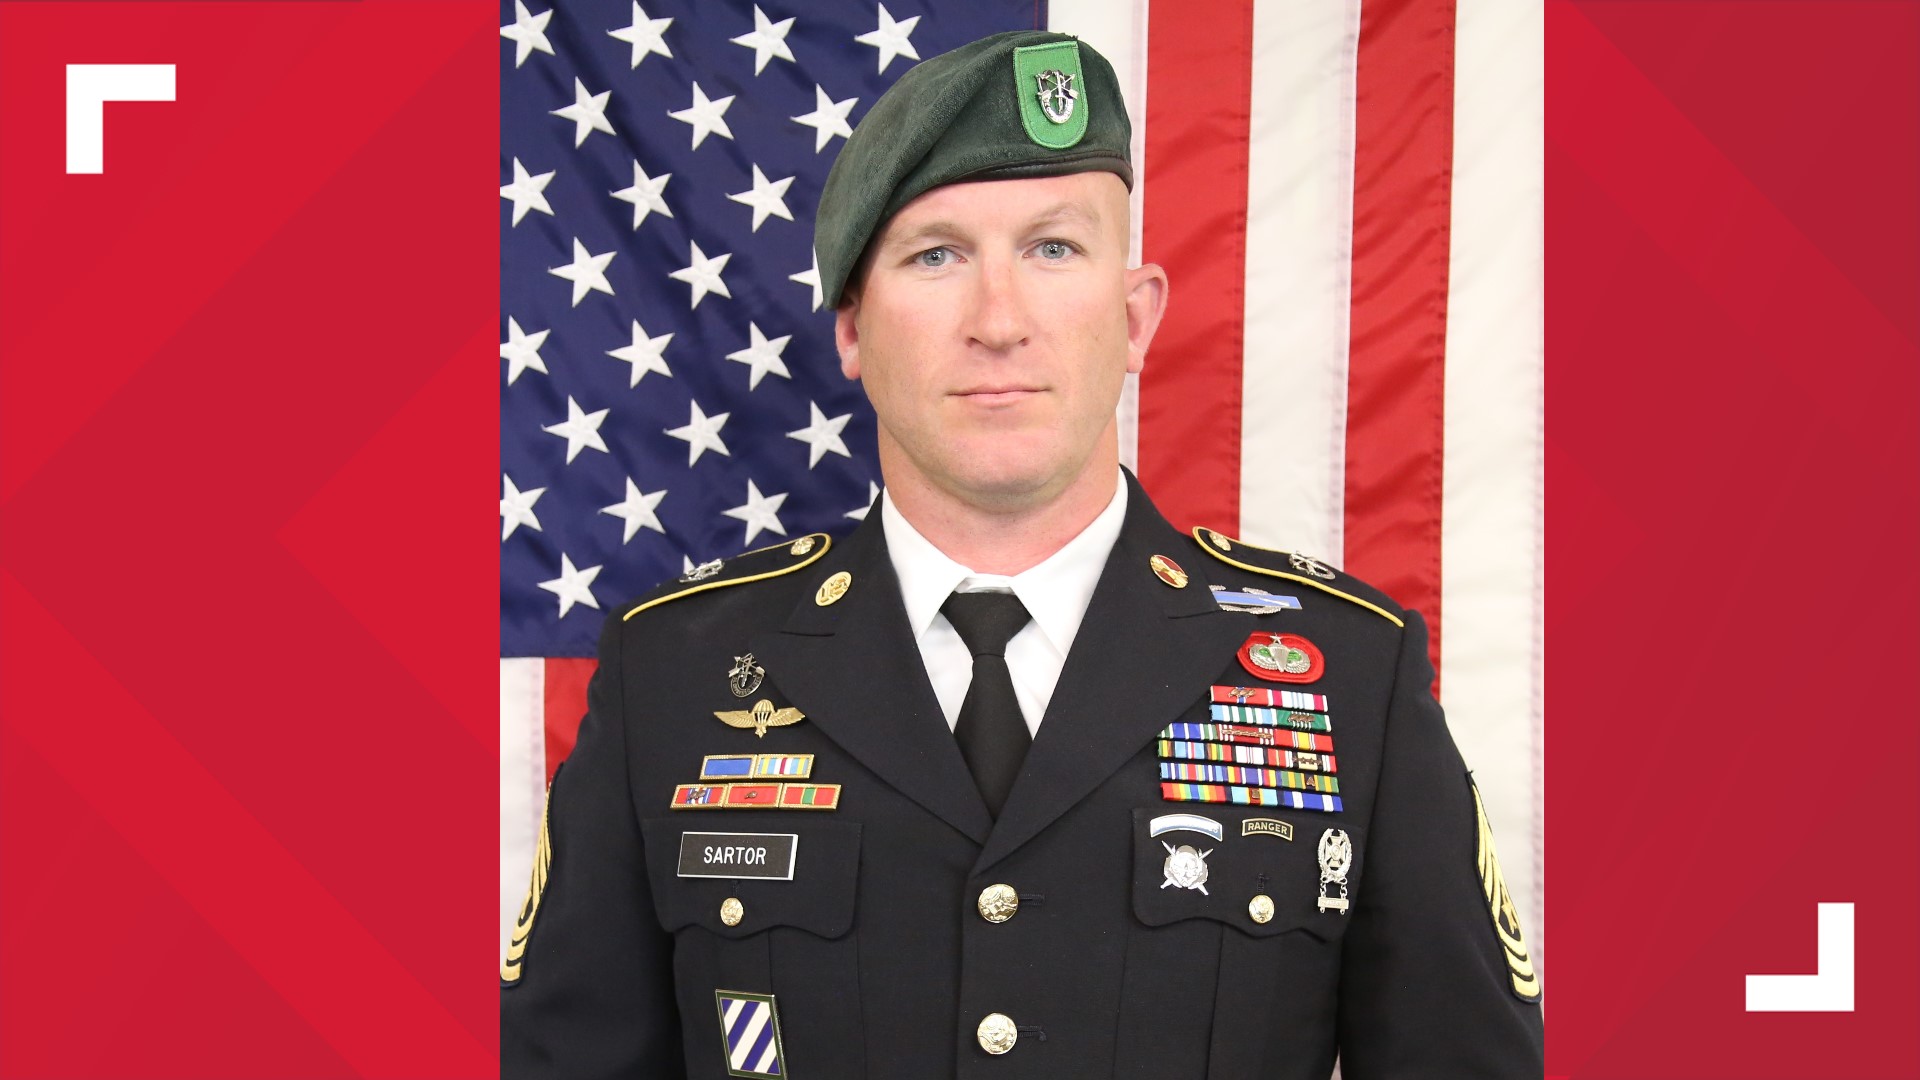 Sgt. Maj. James G. Sartor a decorated Army serviceman, died on July 13 in combat while serving in Afghanistan. He was 40 years old.